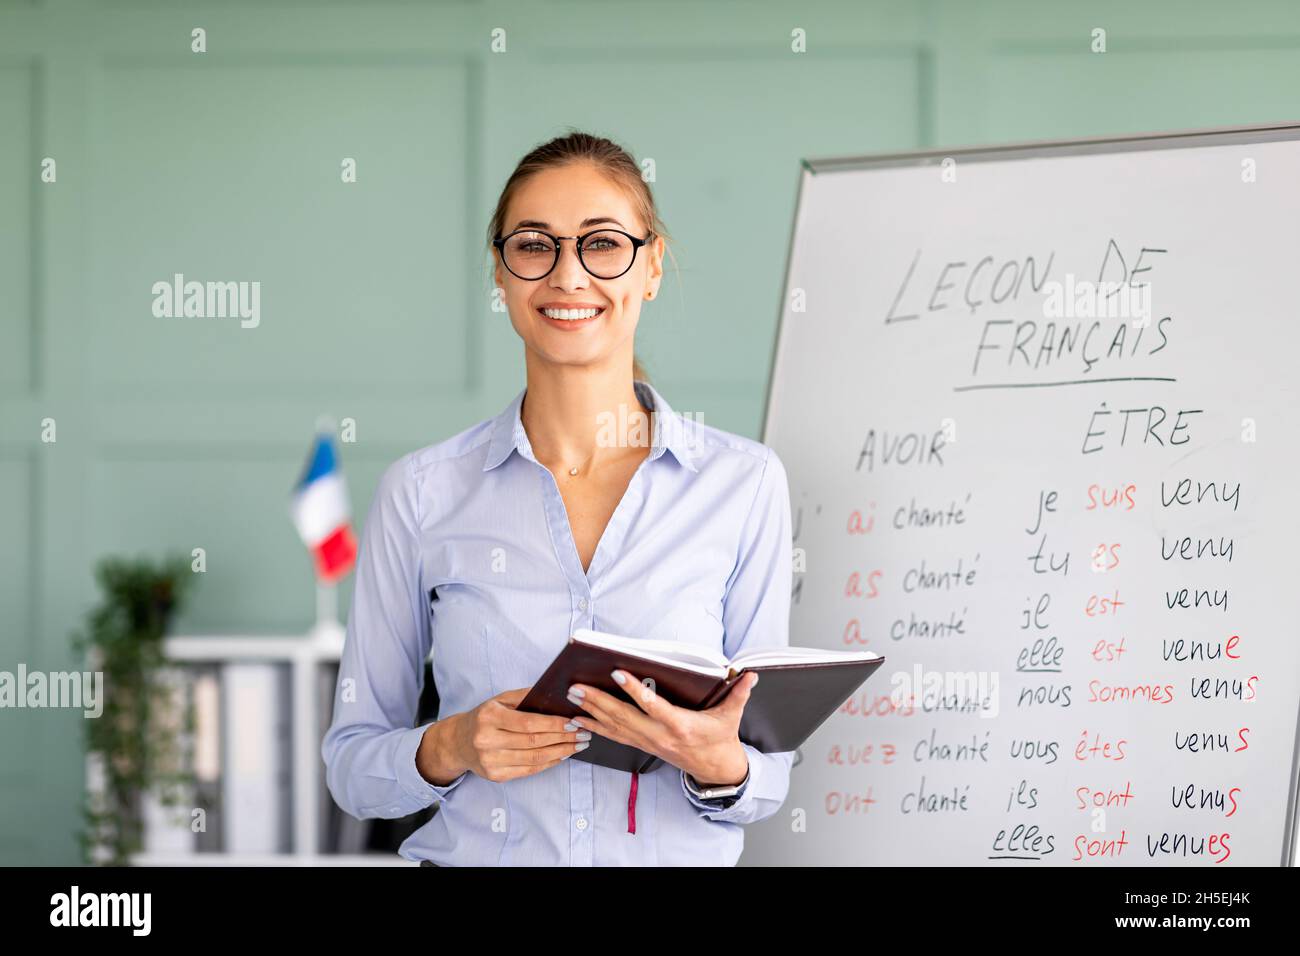 Learning and knowledge concept. Young smiling woman posing near whiteboard with French language grammar rules Stock Photo